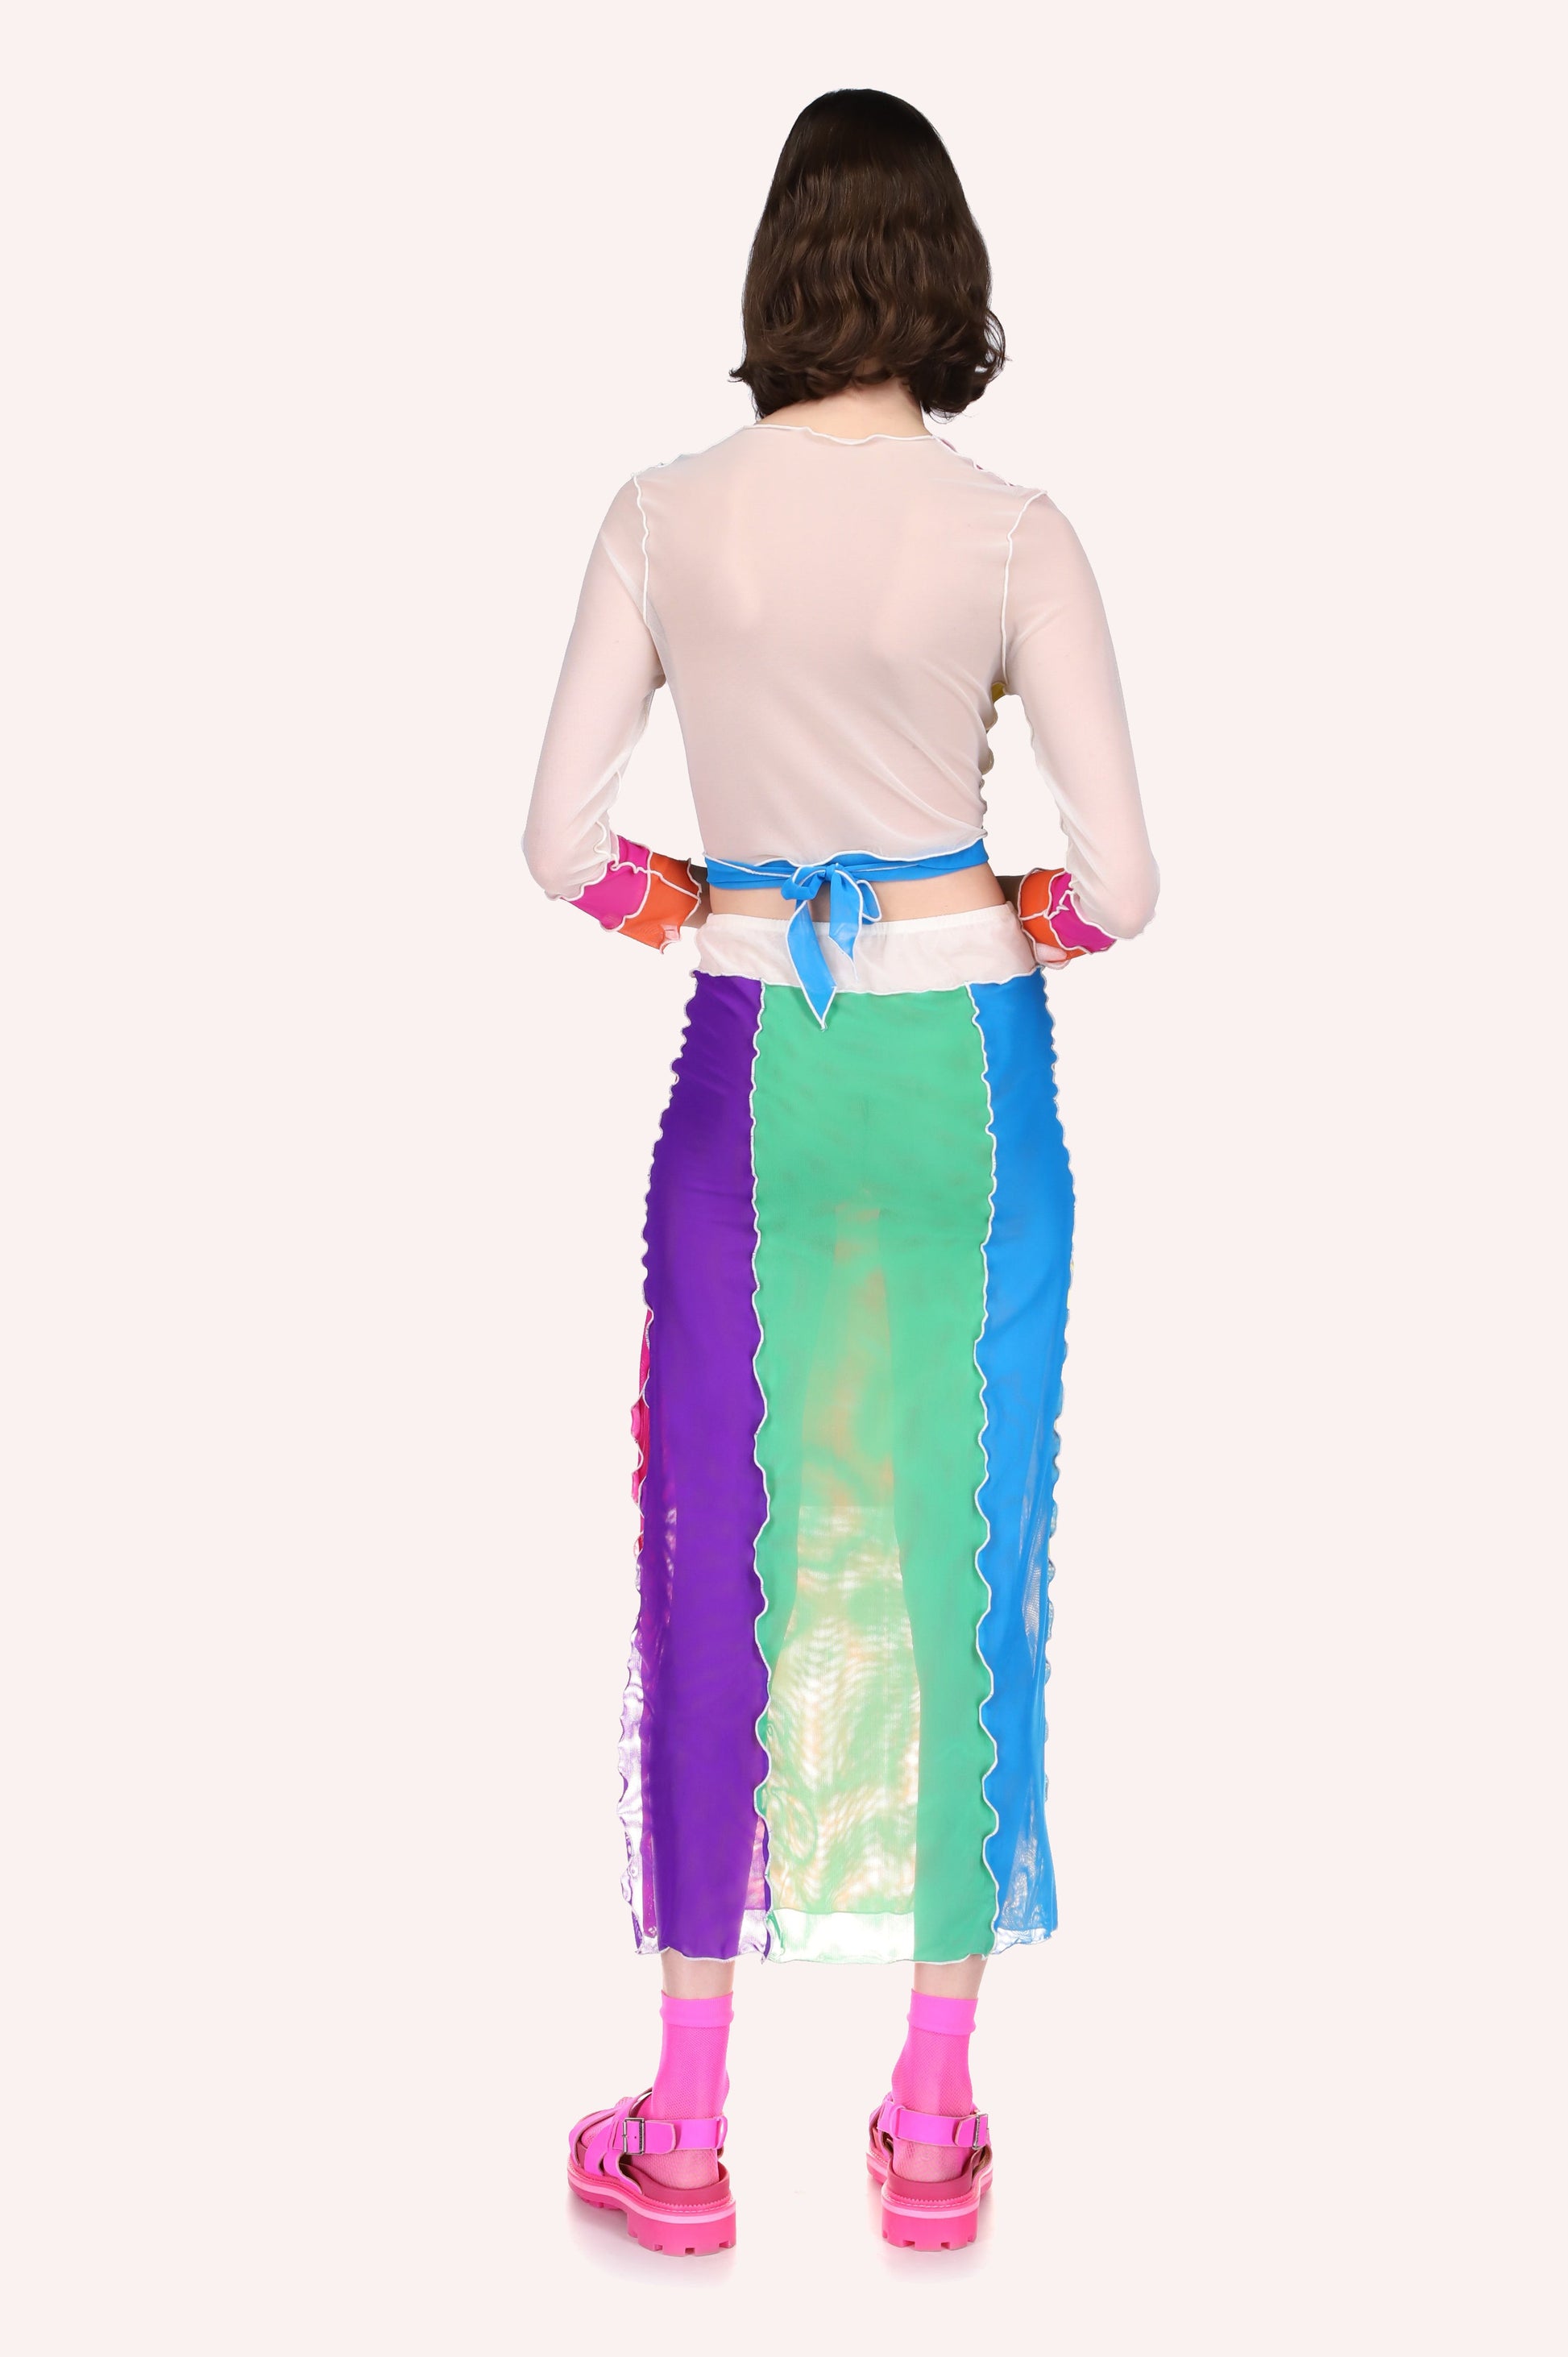 Mesh Skirt back colors are middle light green, right is blue, left purple, all seams are in white